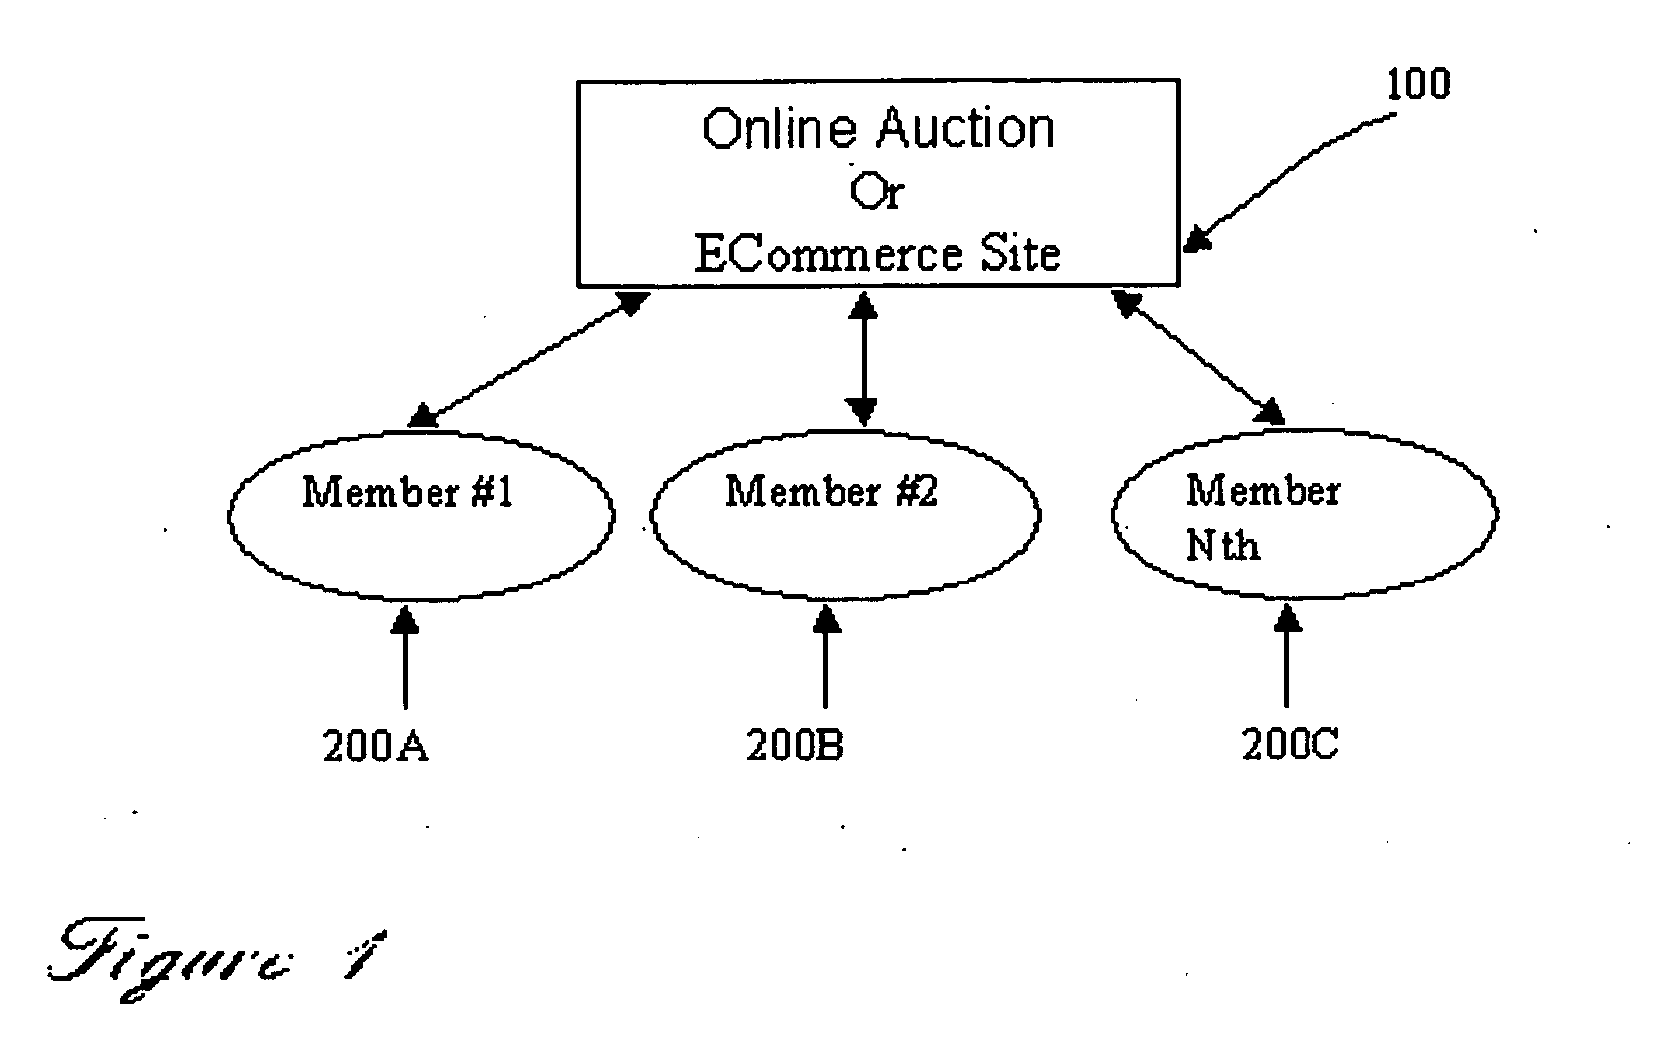 Business method and model for integrating social networking into electronic auctions and ecommerce venues.